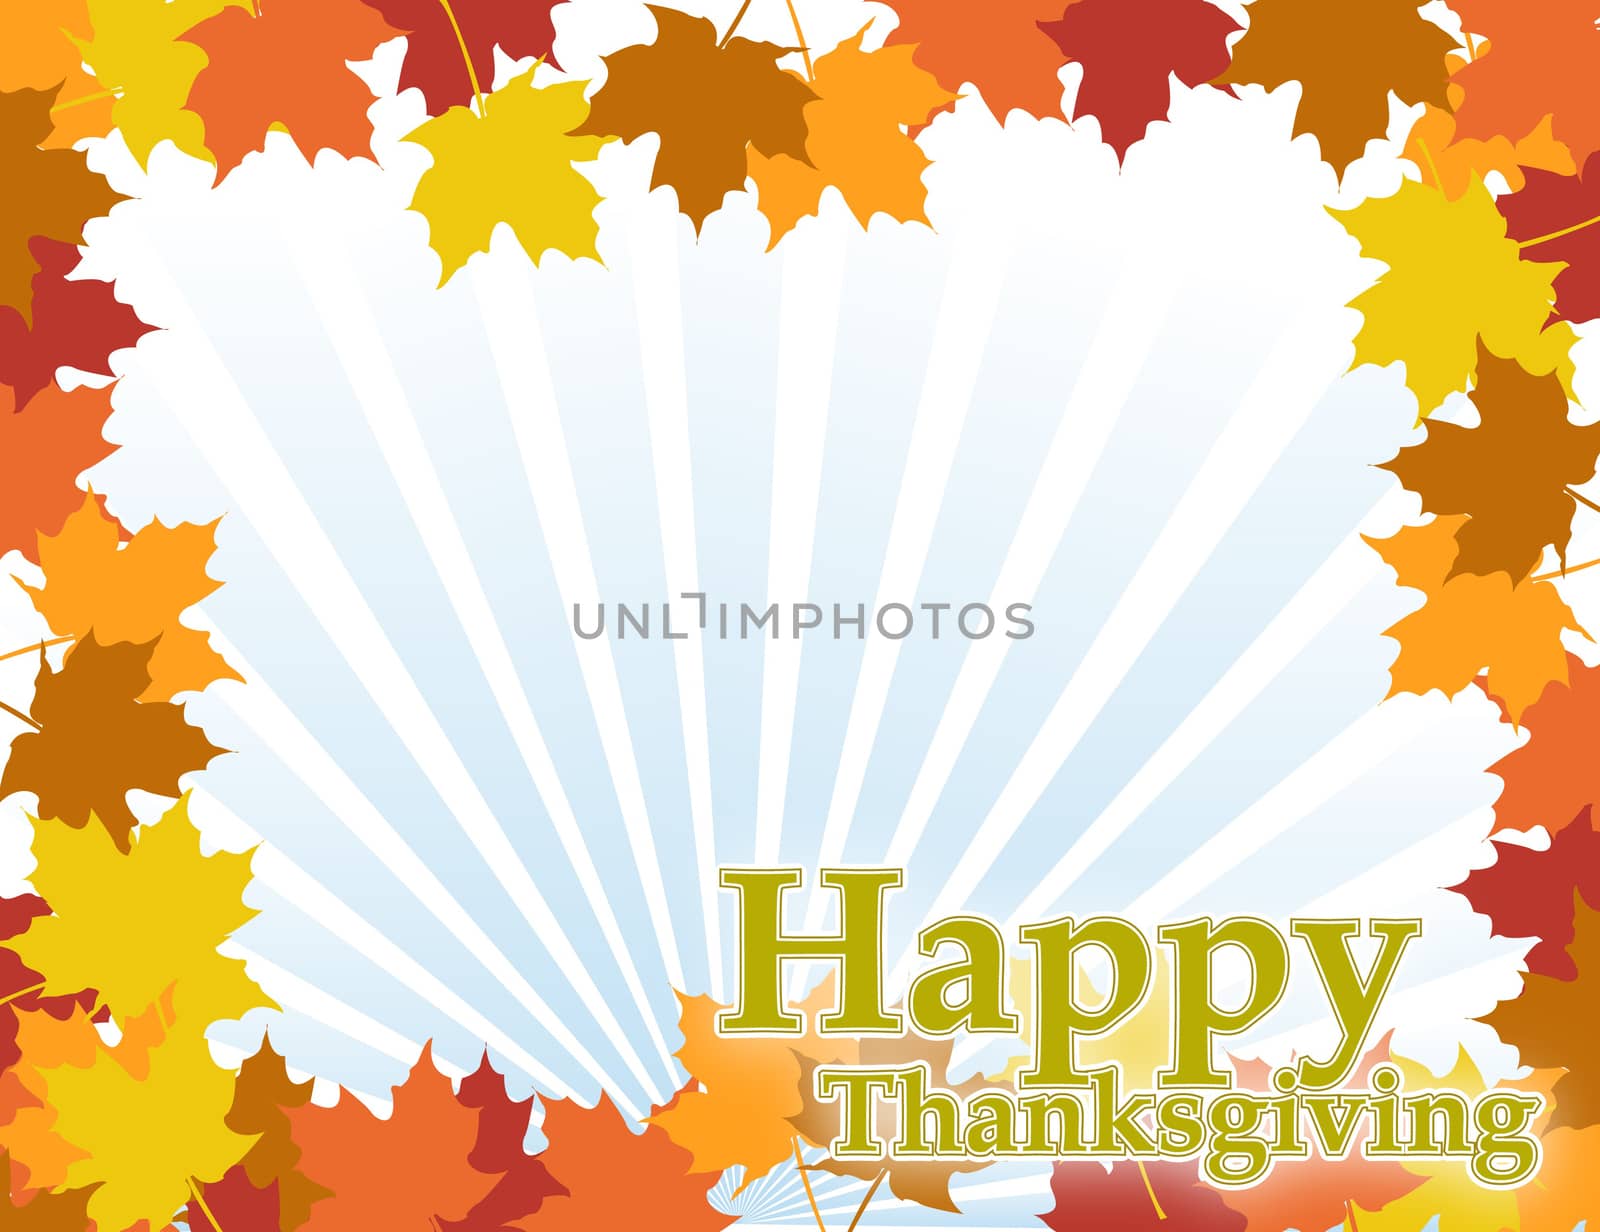 Illustration composition for Thanksgiving invitation or greeting card. Happy Thanksgiving.